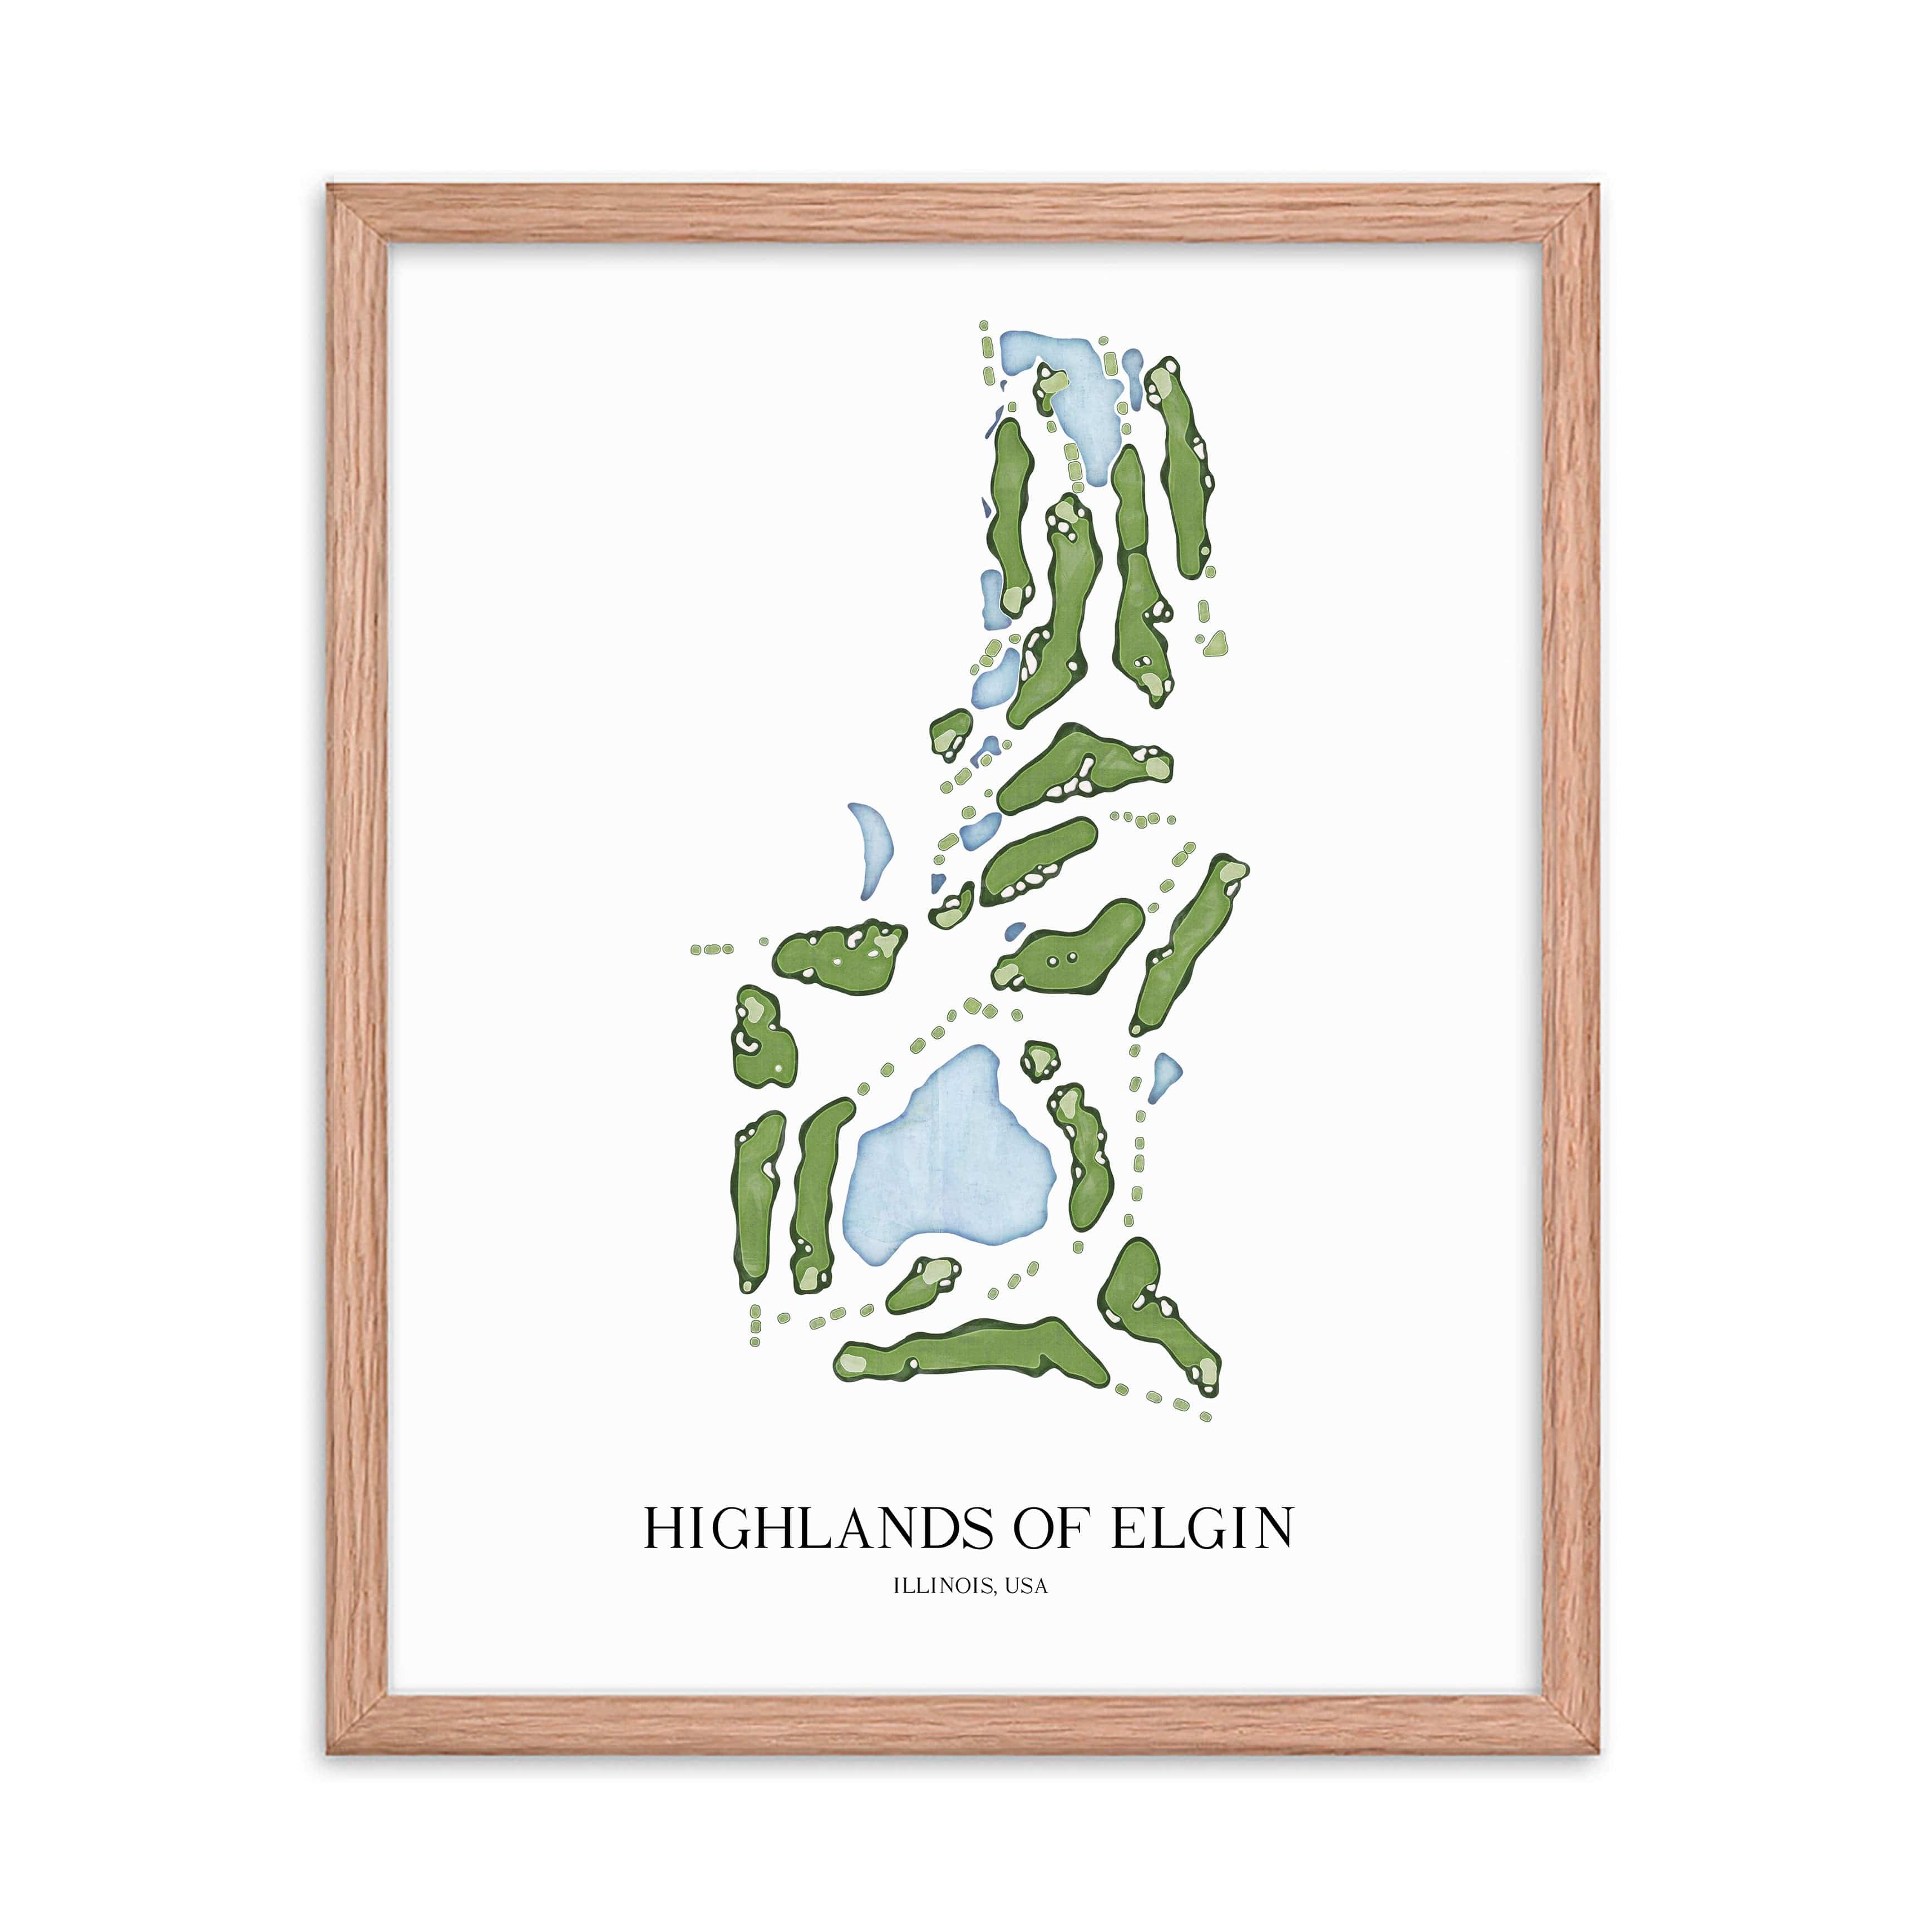 The 19th Hole Golf Shop - Golf Course Prints -  Highlands of Elgin Golf Course Map